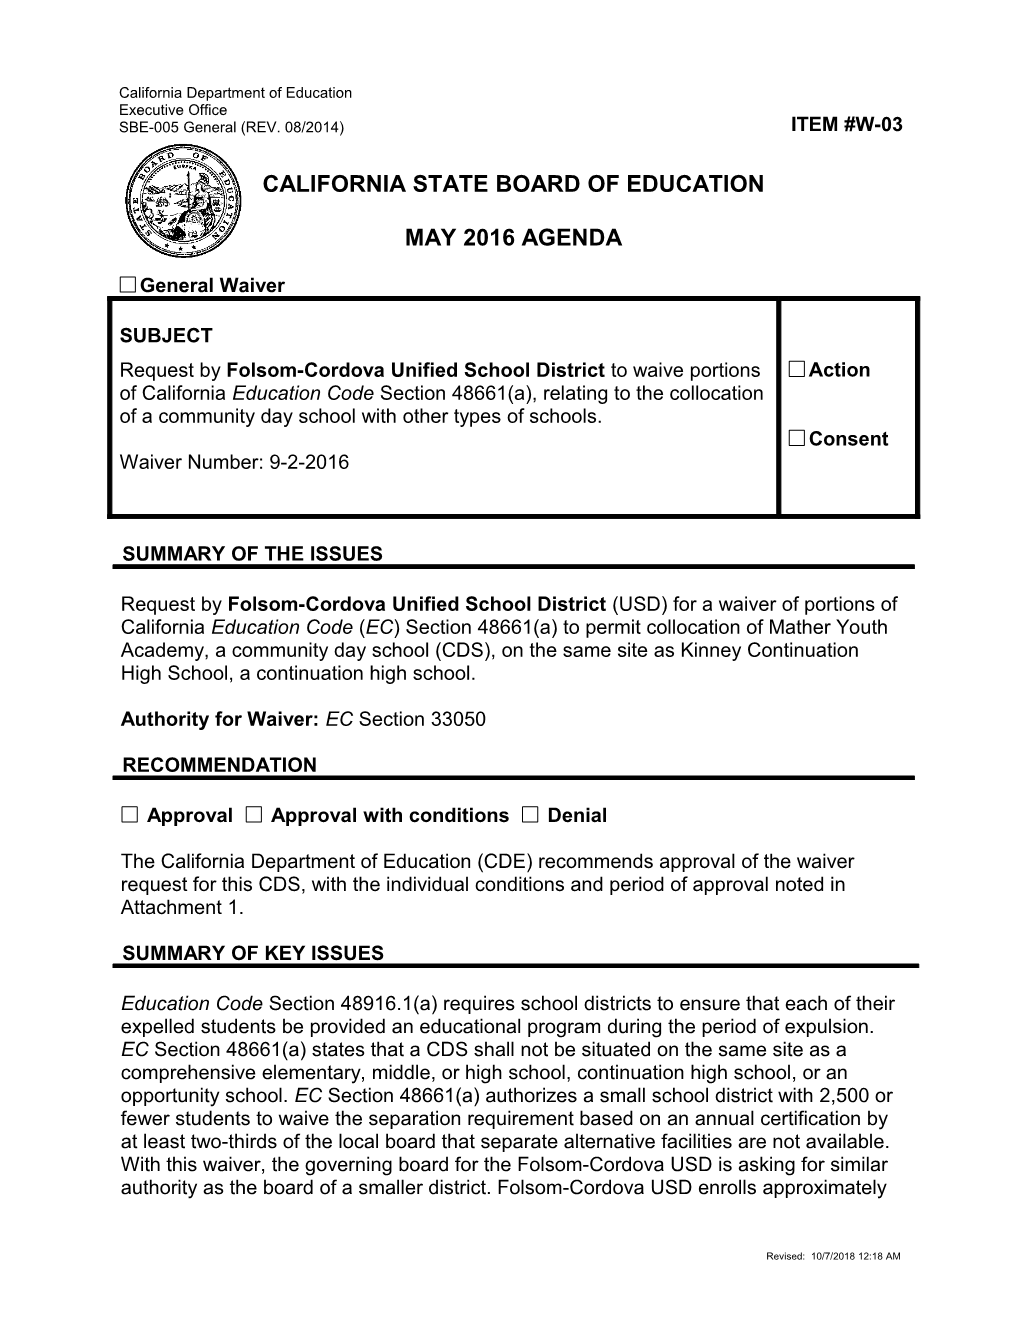 May 2016 Waiver Item W-03 - Meeting Agendas (CA State Board of Education)